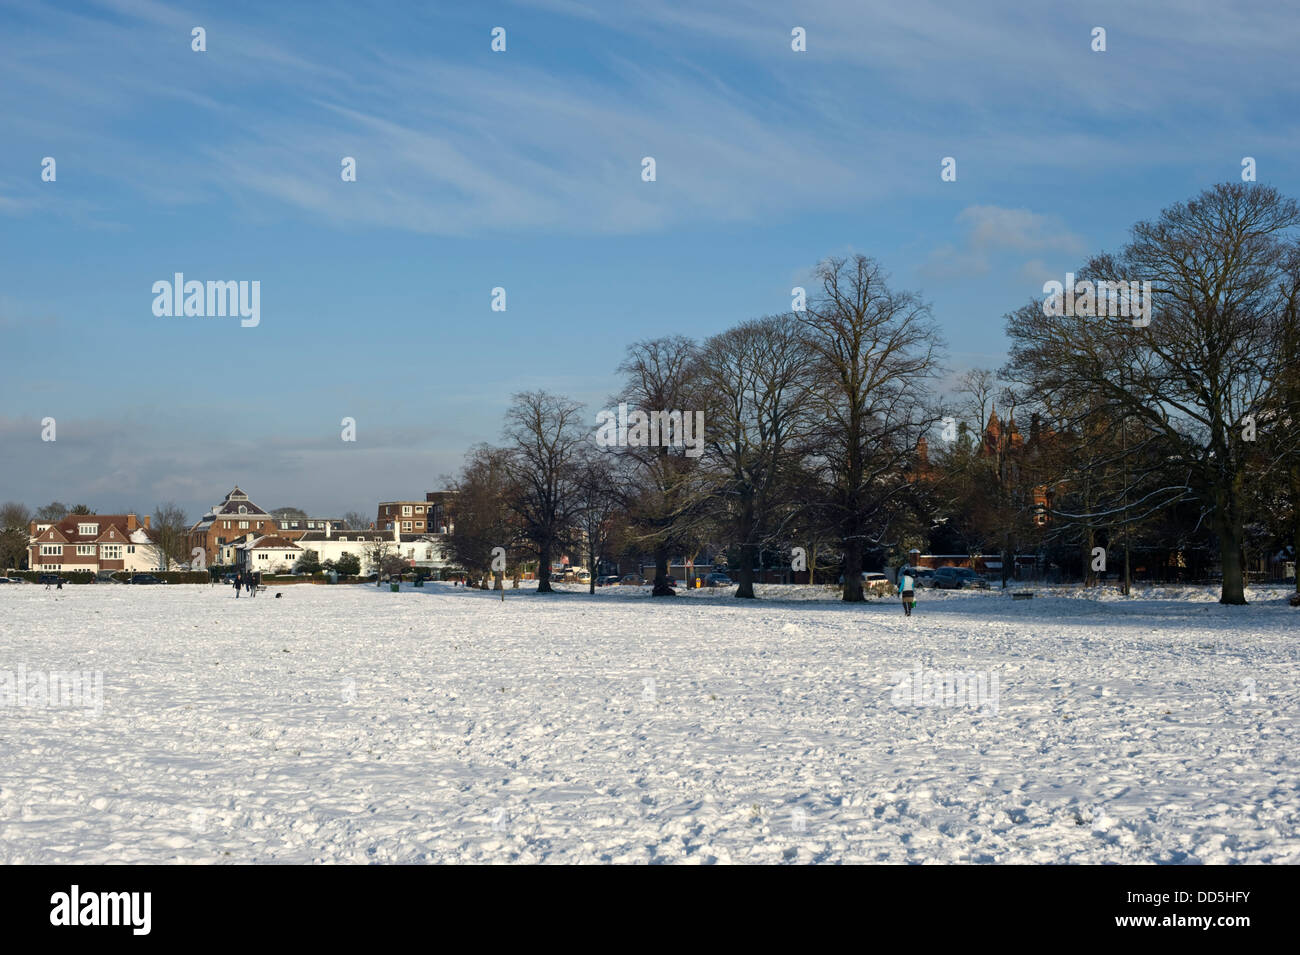 Wimbledon, London, England, January 21, 2013: The South Common section of Wimbledon Common on a cold clear day, covered in snow. Stock Photo